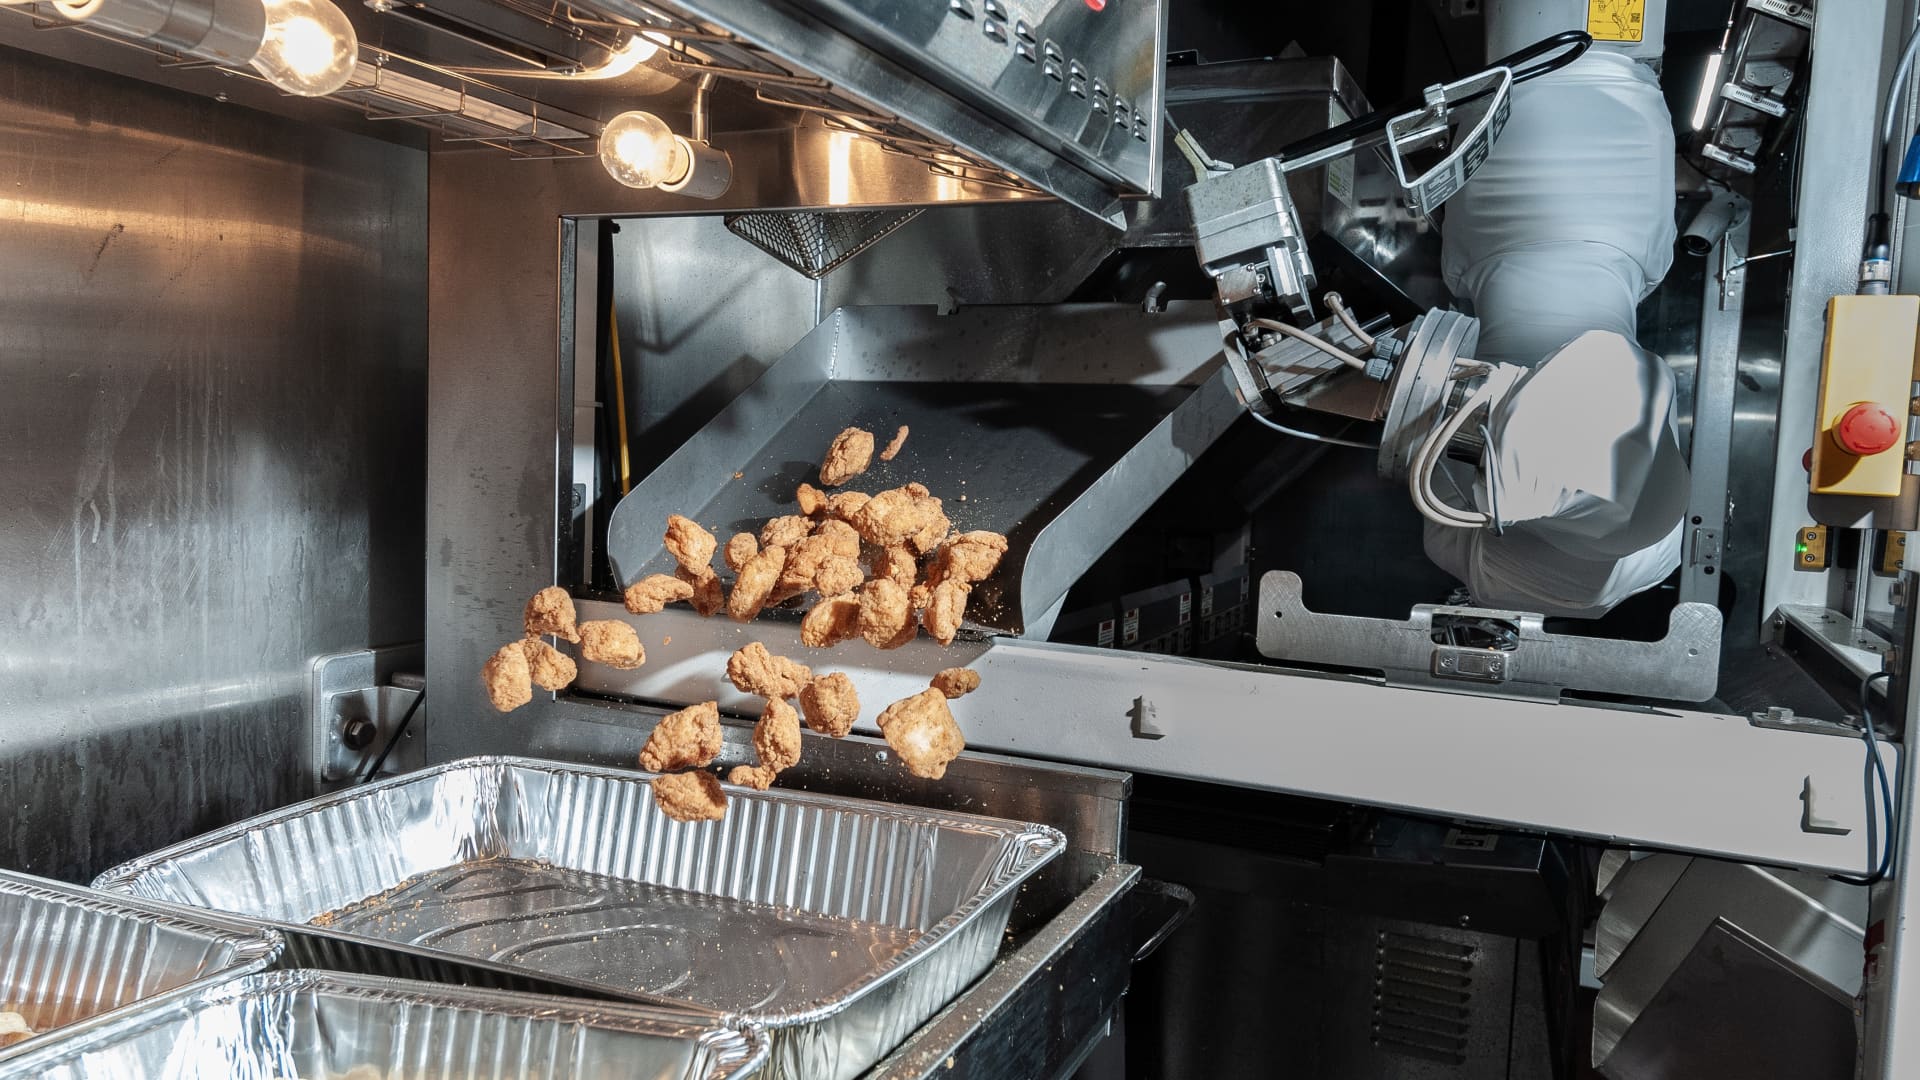 Miso Robotics is working on rolling out a new version of its Flippy bot, tasked with making wings in a fryer.